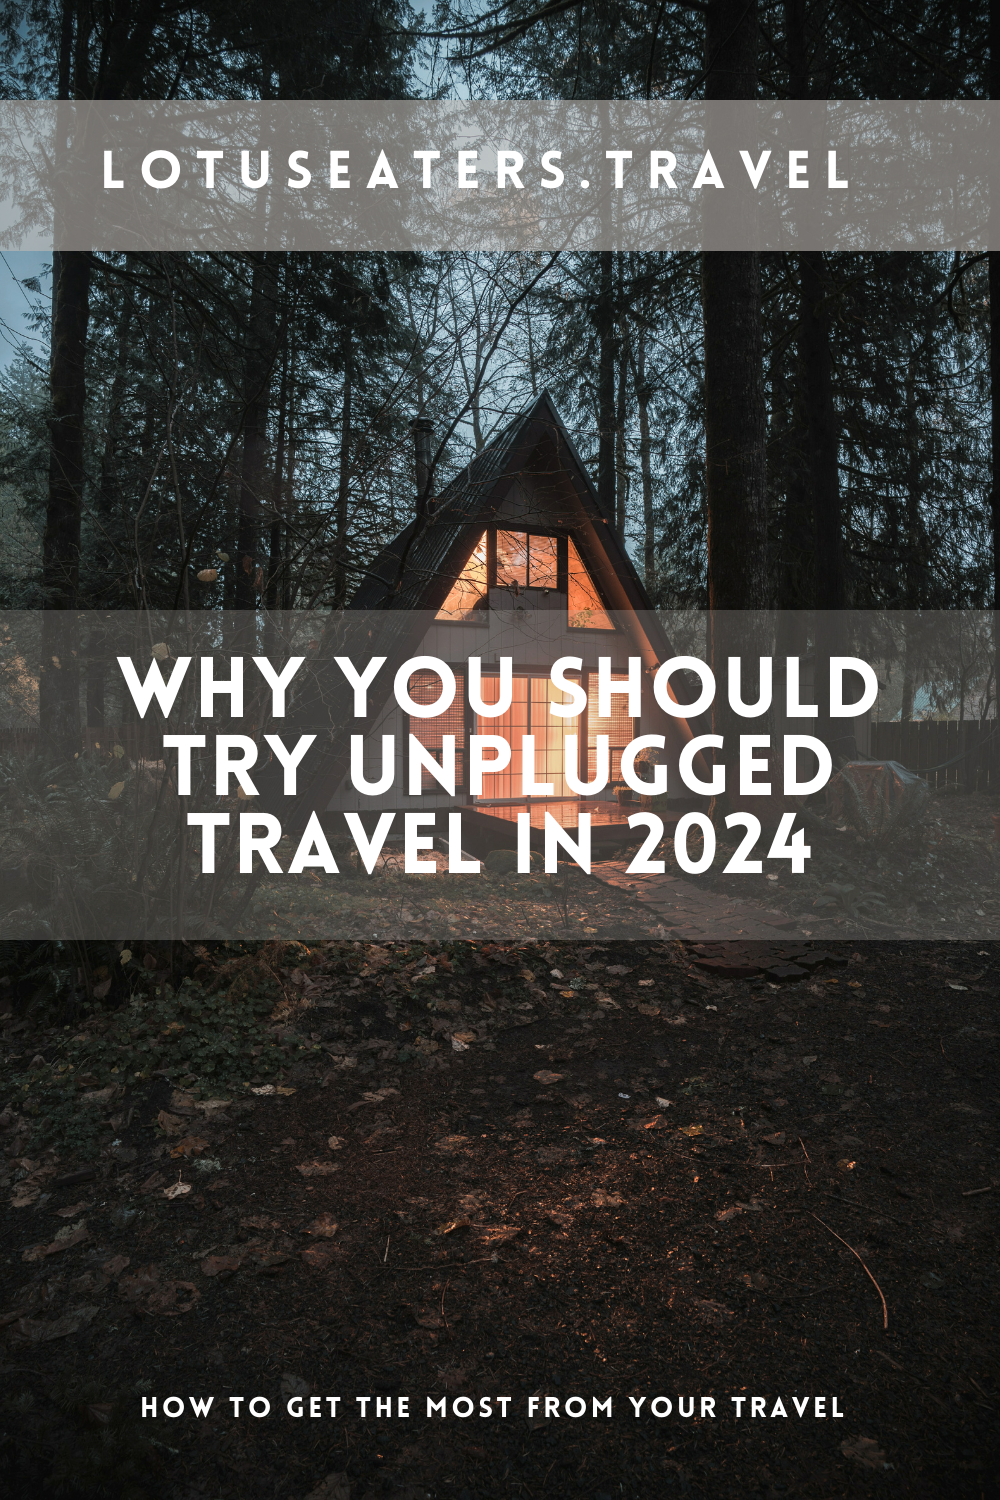 Why you should try unplugged travel in 2024